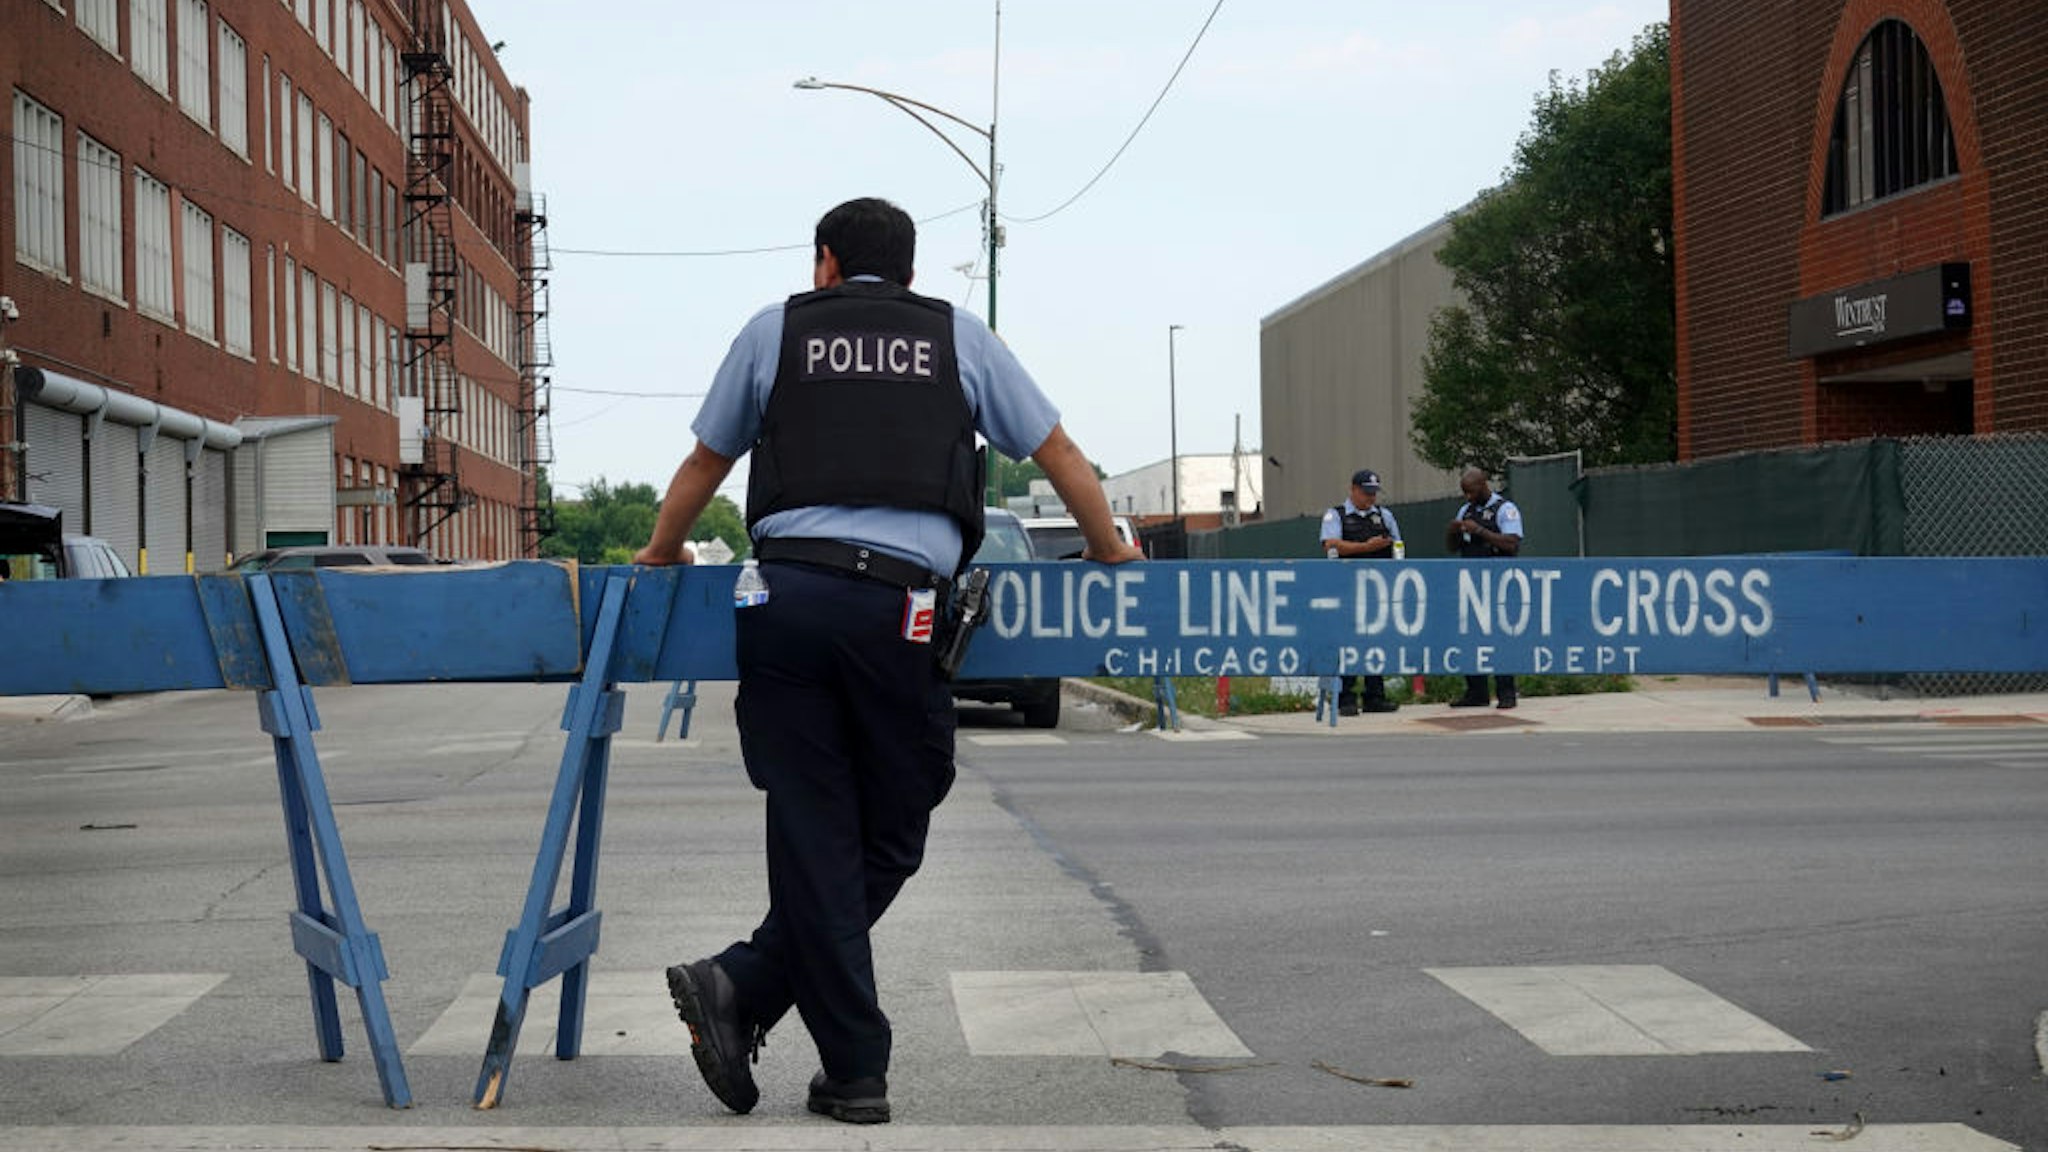 CHICAGO, ILLINOIS - AUGUST 15: Police stand guard as pro and anti-police demonstrators are expected to gather outside of the Homan Square police station on August 15, 2020 in Chicago, Illinois. The demonstration was one of several in the city today, either in support of or in opposition to police. (Photo by Scott Olson/Getty Images)